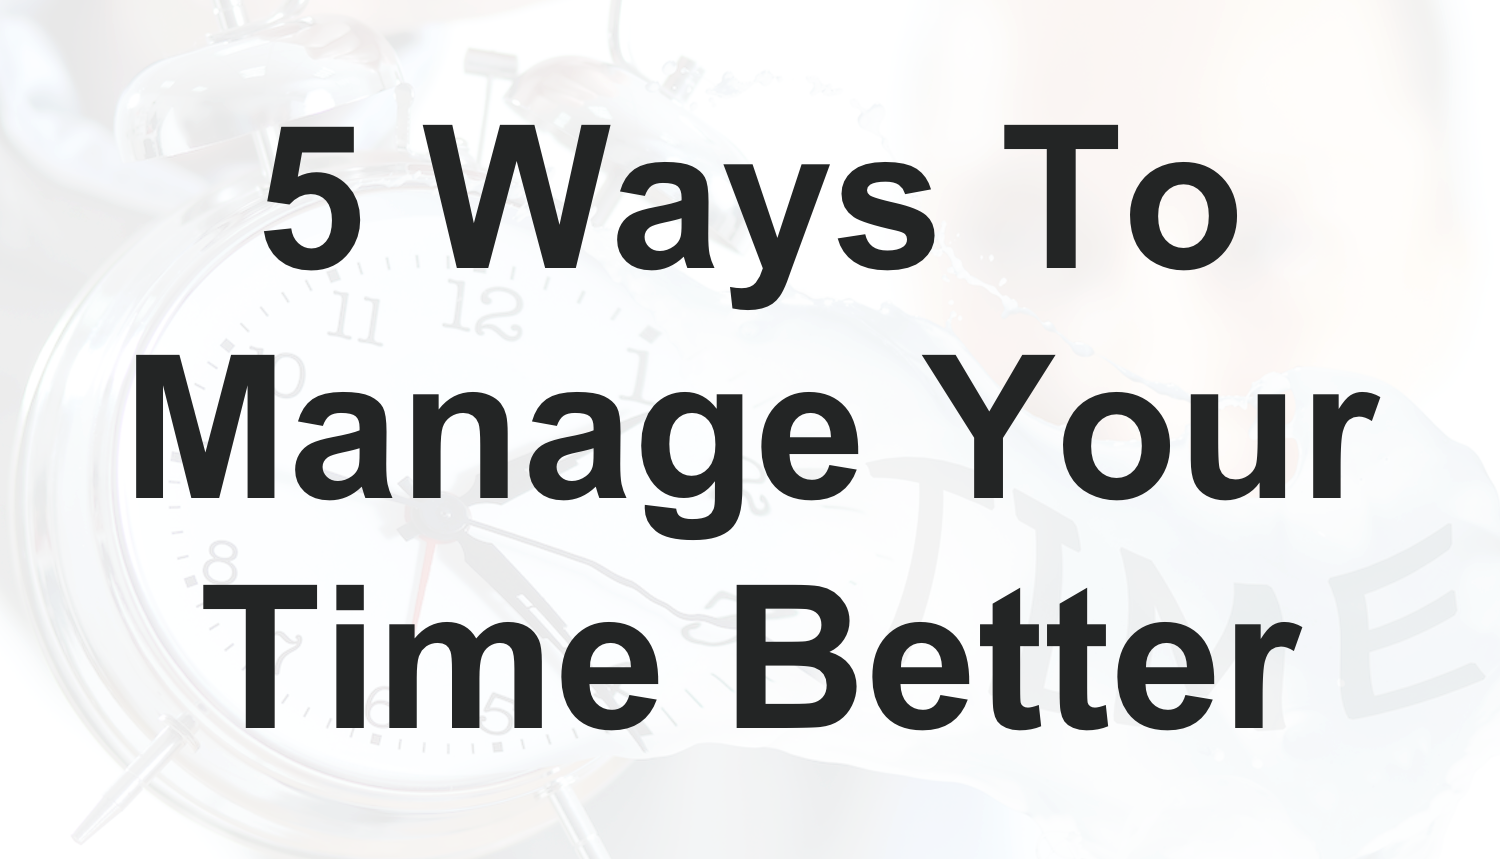 5 Ways To Manage Your Time Better